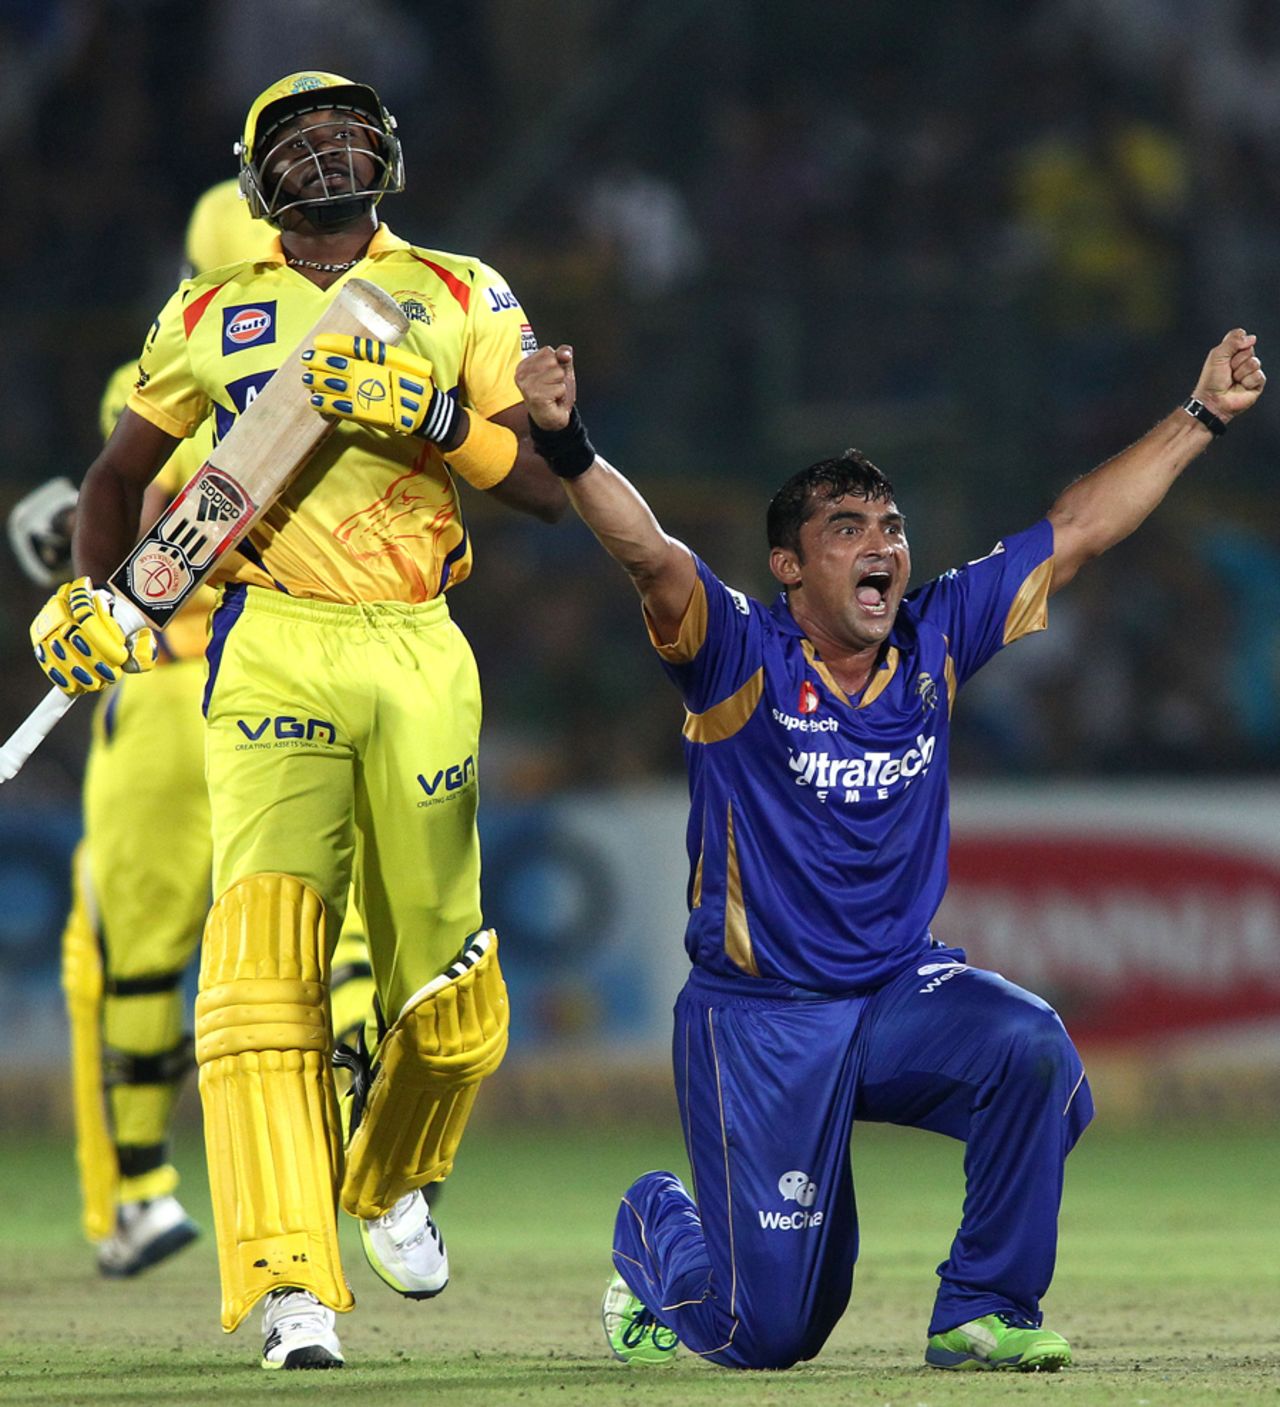 Pravin Tambe appeals successfully to have Dwayne Bravo lbw, Rajasthan Royals v Chennai Super Kings, 1st semi-final, Champions League 2013, Jaipur, October 4, 2013